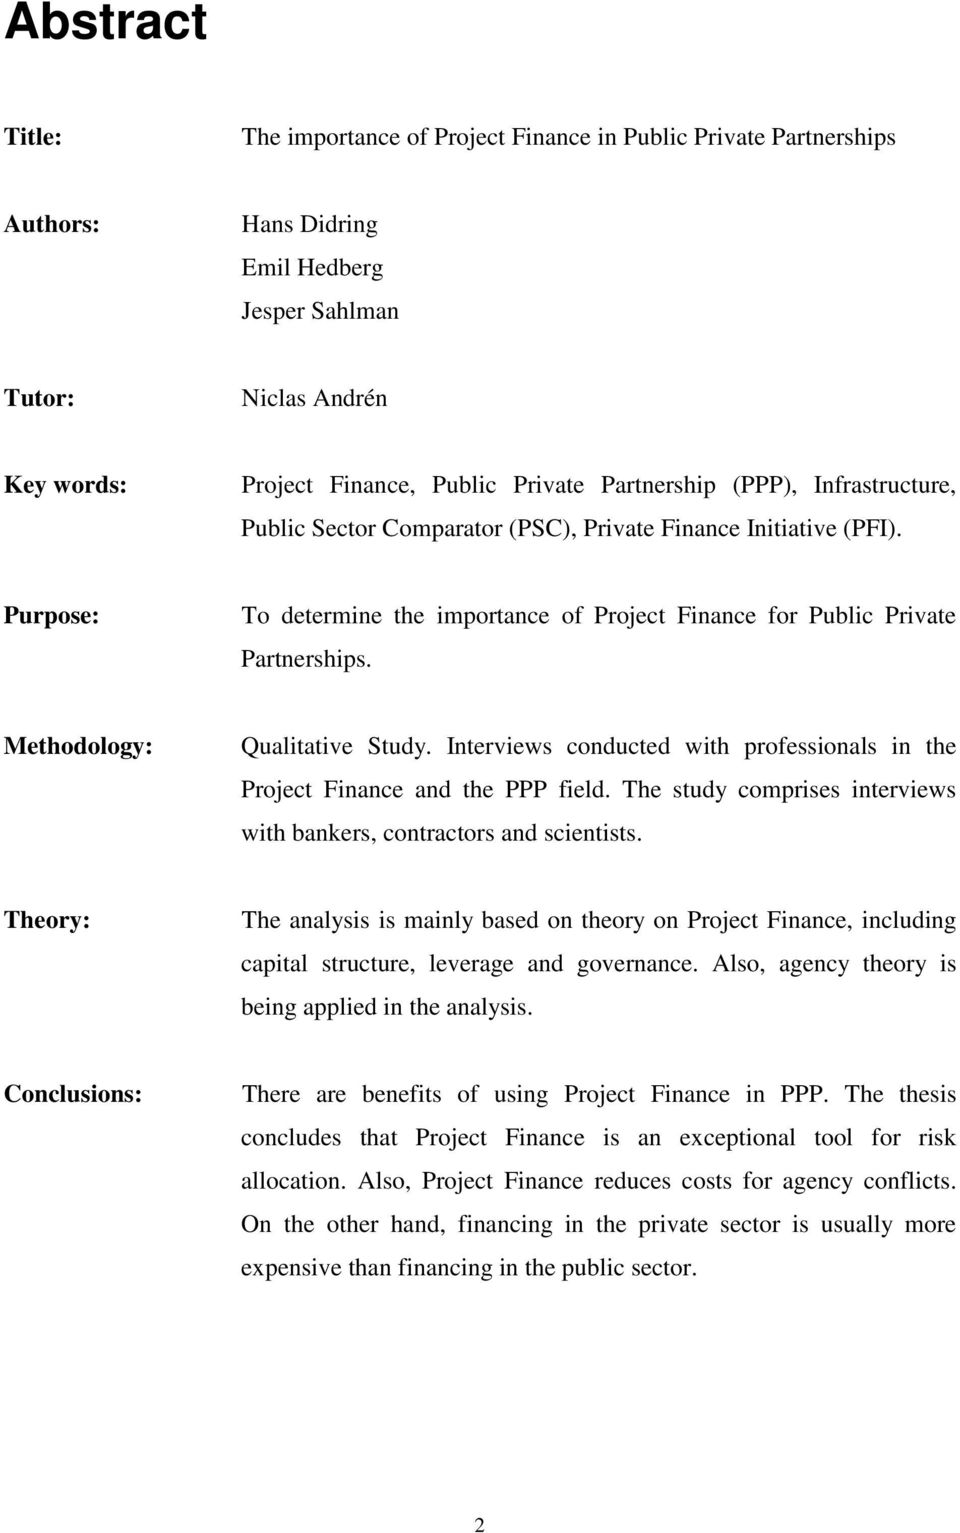 Methodology: Qualitative Study. Interviews conducted with professionals in the Project Finance and the PPP field. The study comprises interviews with bankers, contractors and scientists.